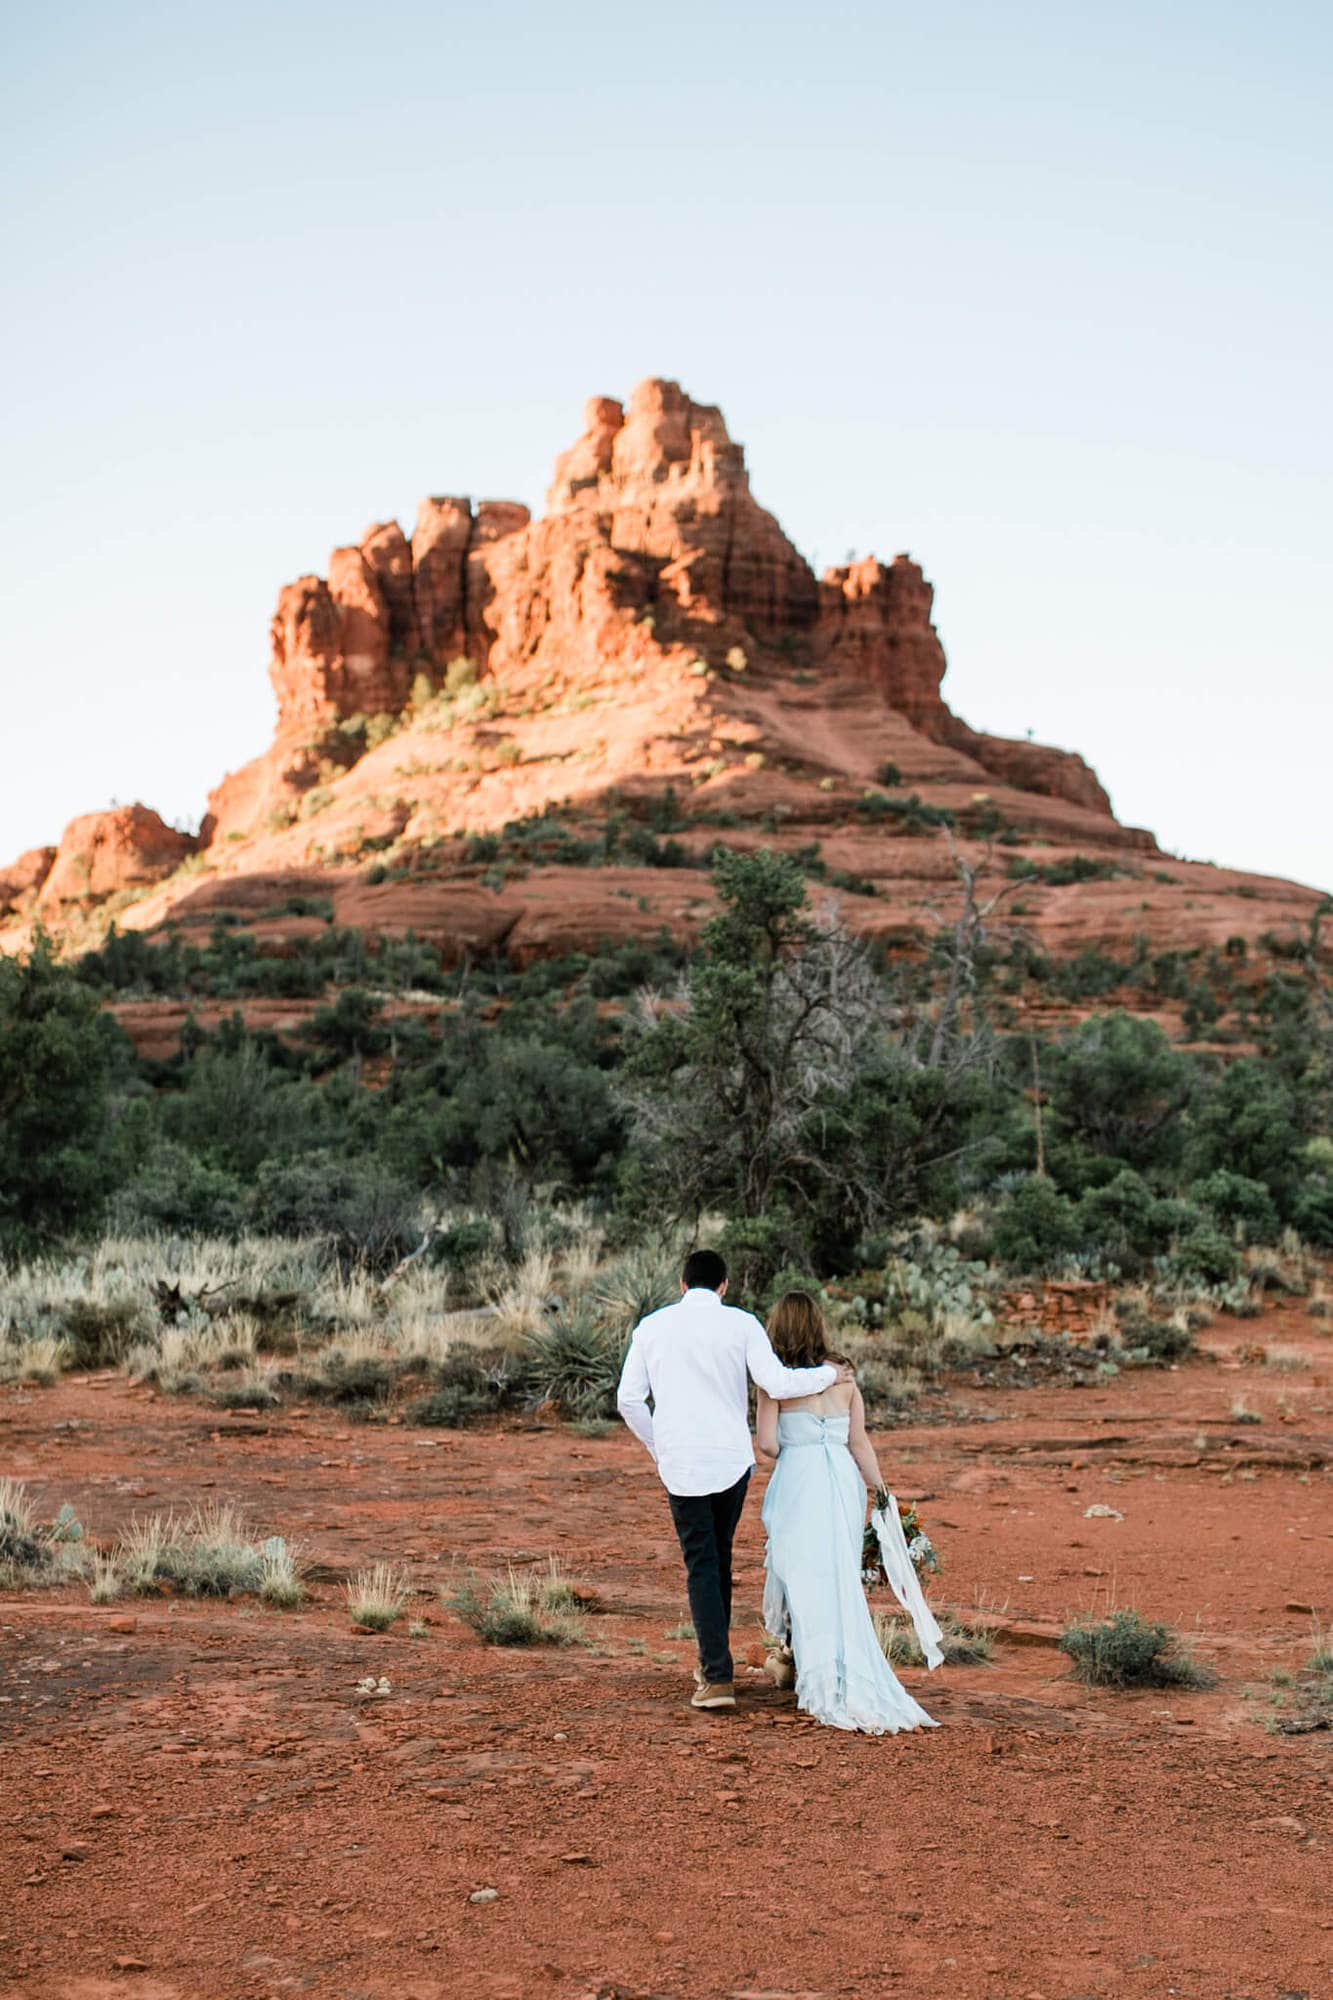 With his arms around her shoulders, the groom and bride walk towards Bell Rock.